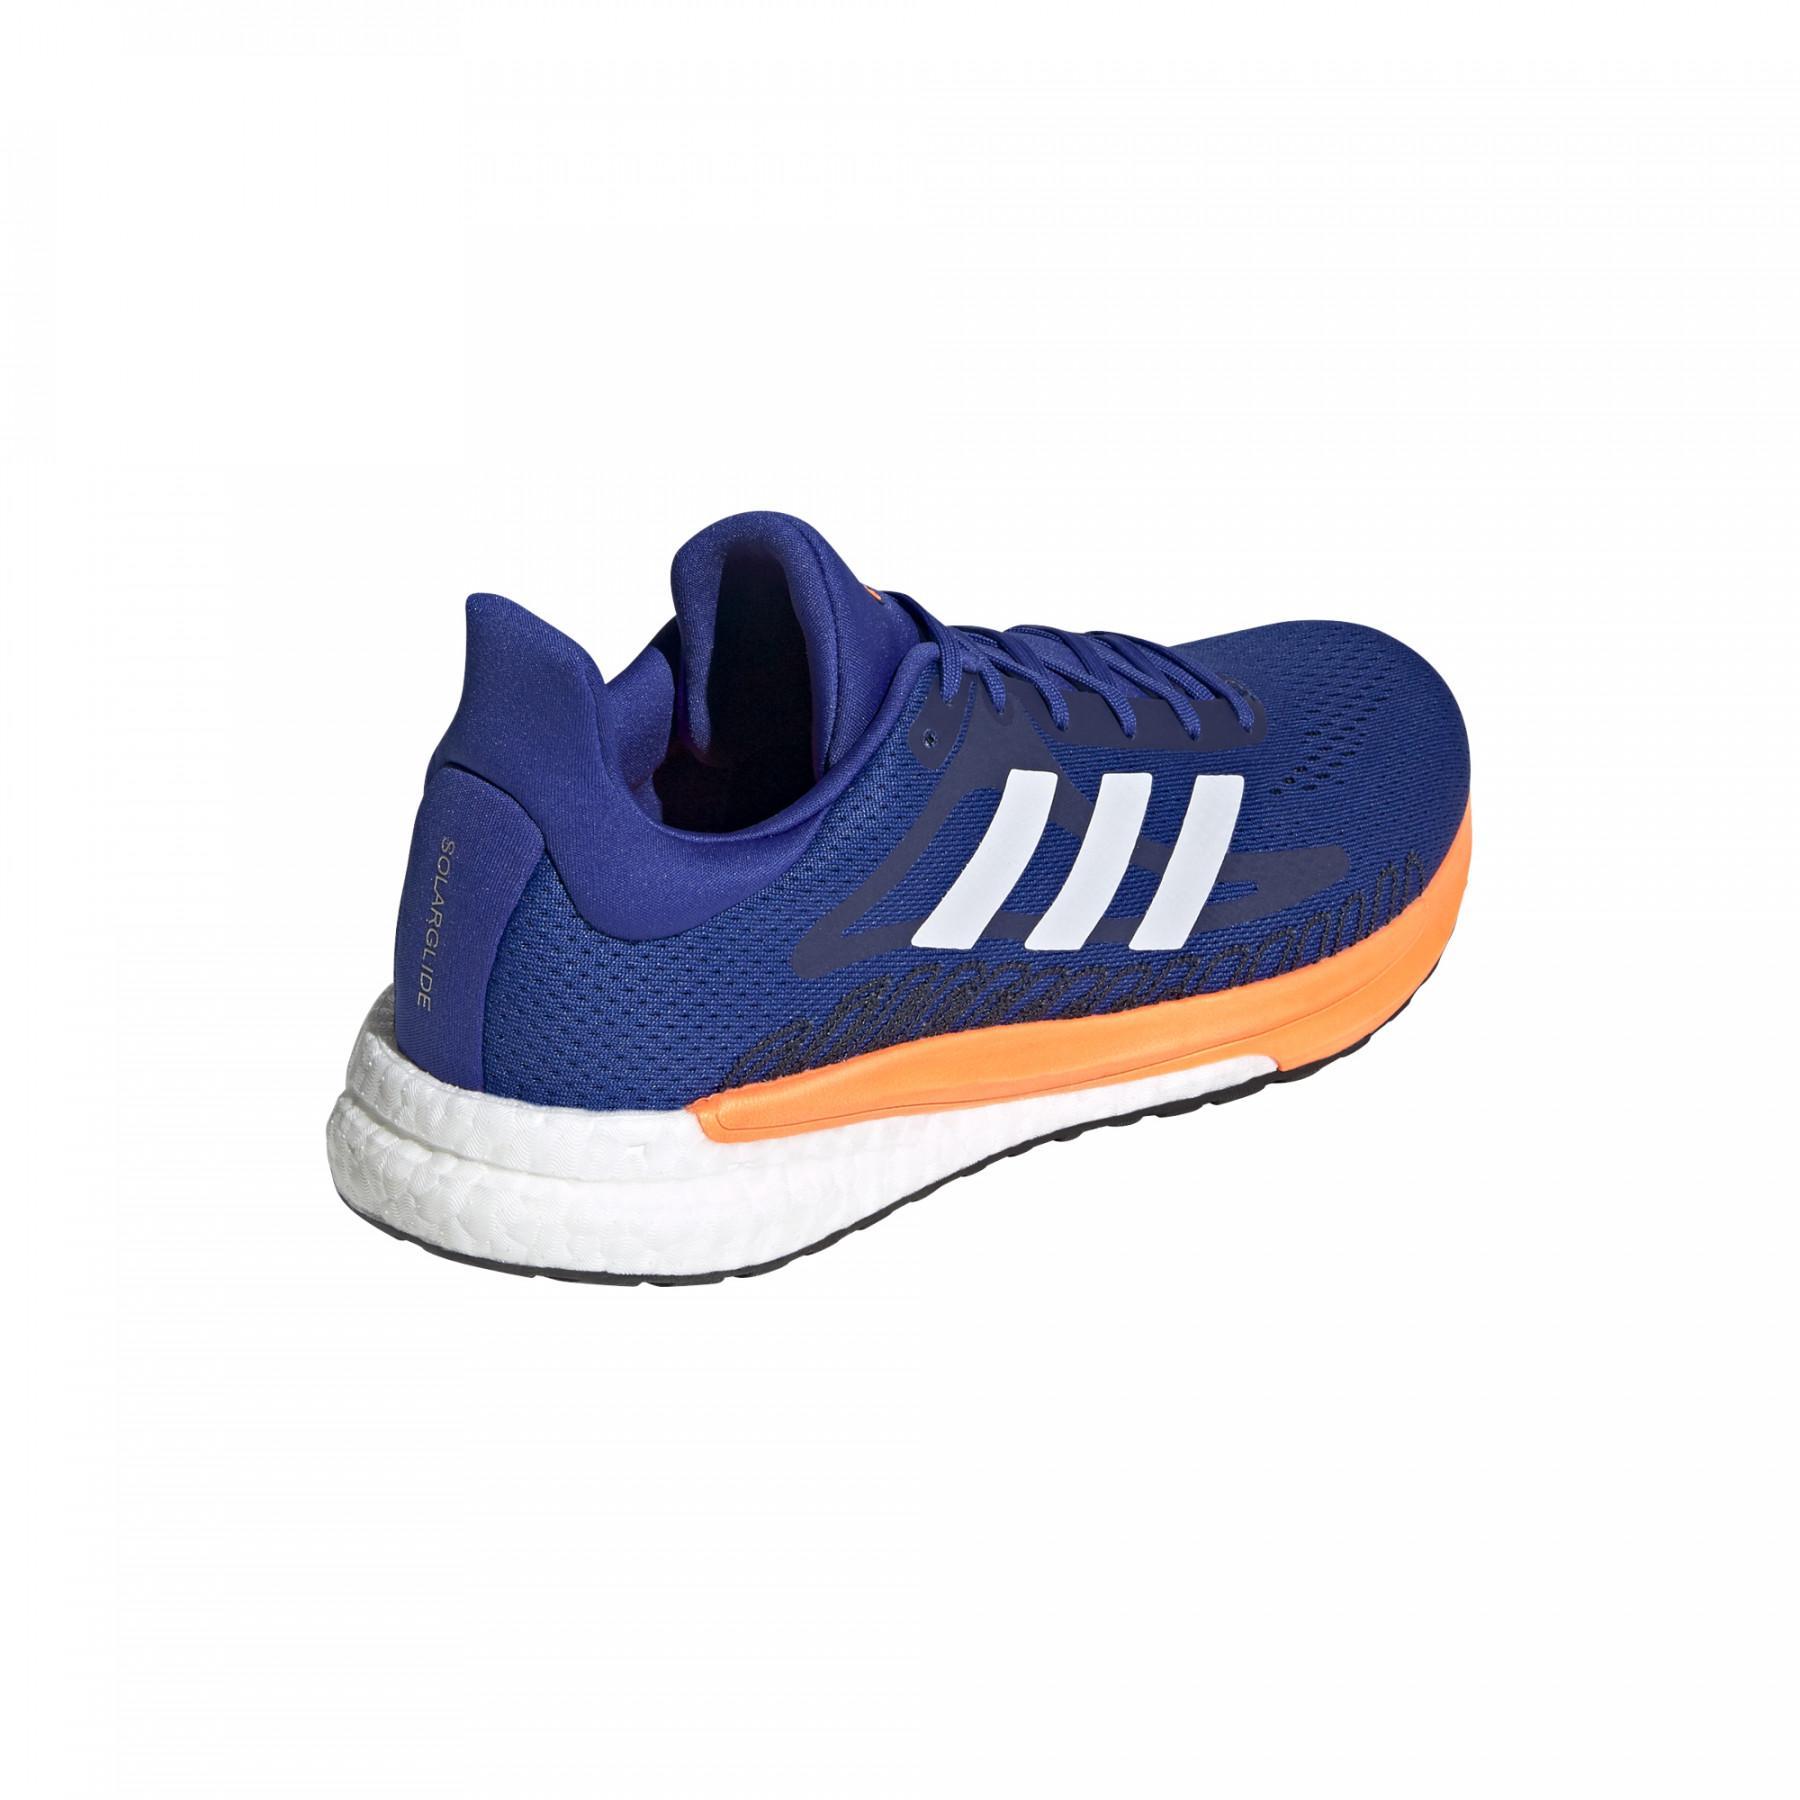 Running shoes adidas SolarGlide 3